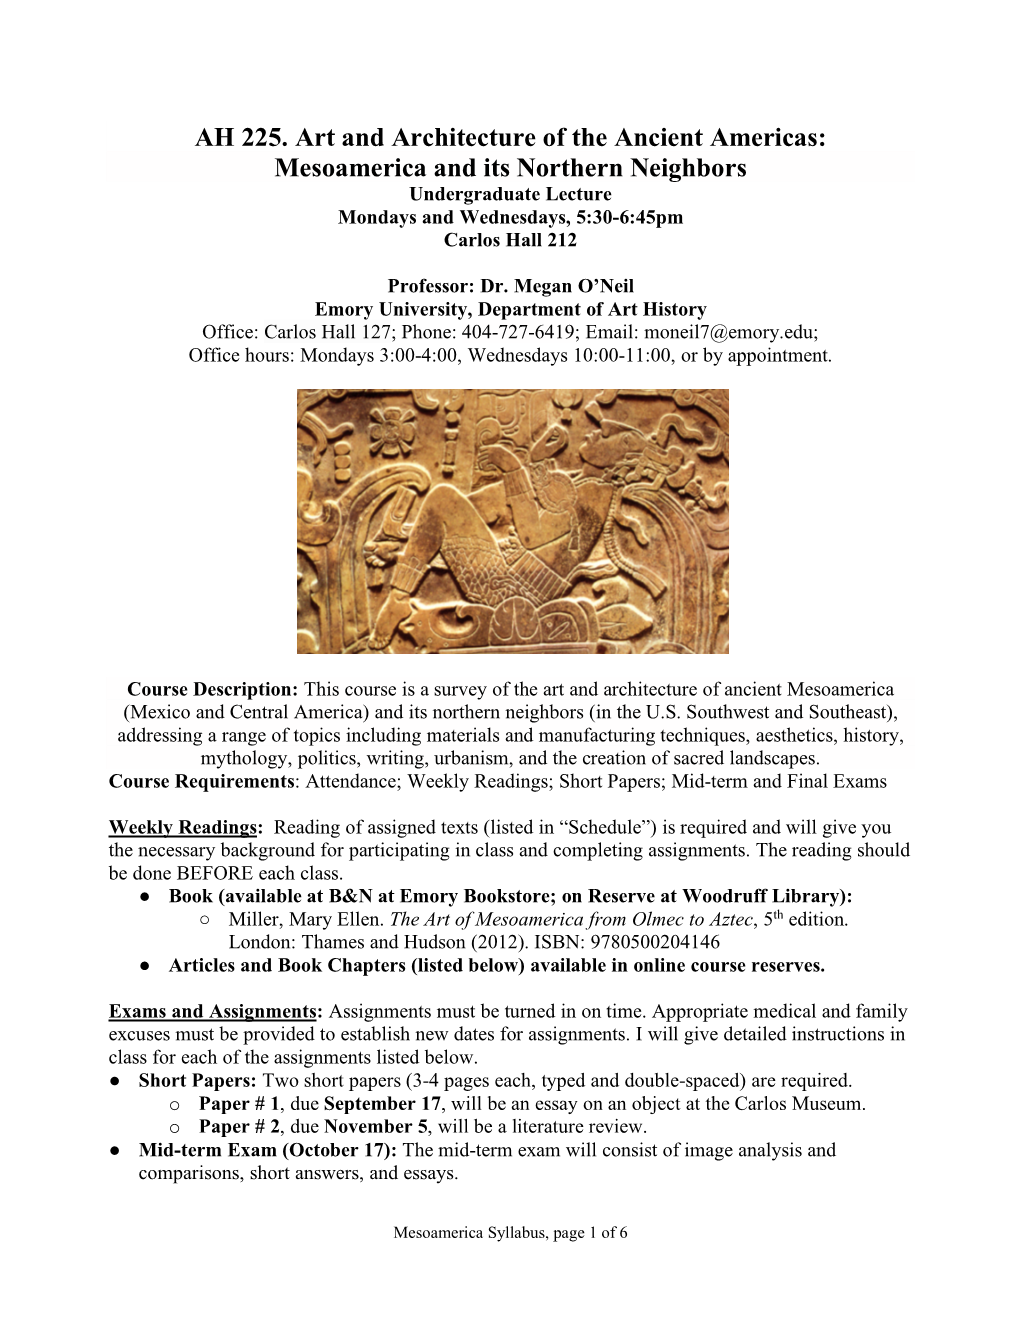 AH 225. Art and Architecture of the Ancient Americas: Mesoamerica and Its Northern Neighbors